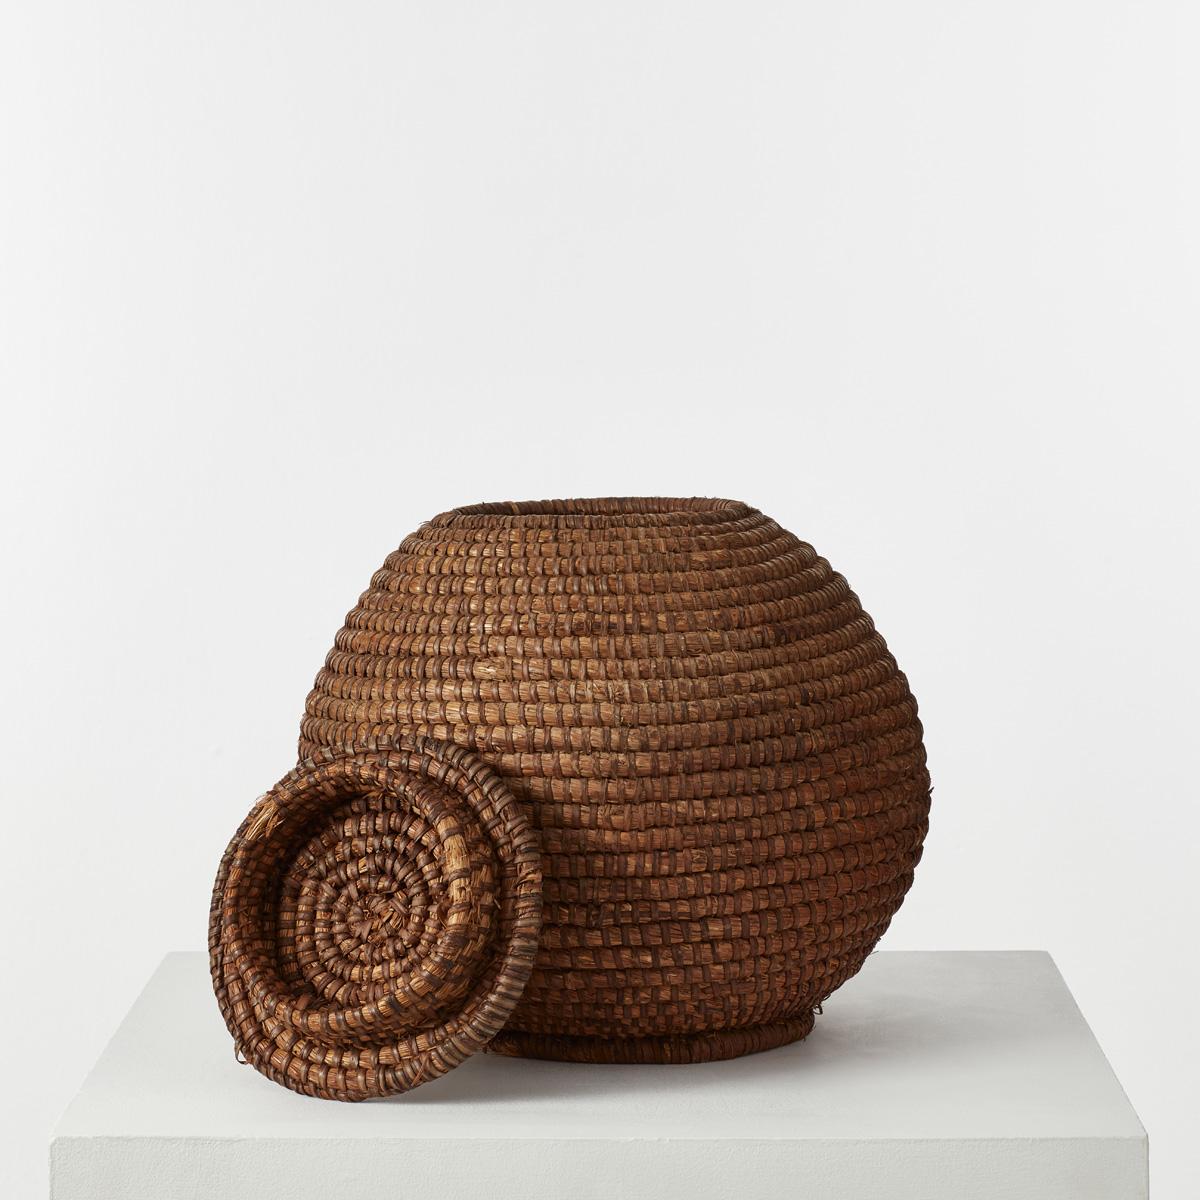 A well-constructed, rounded rattan basket with a lid. It has a characterful rustic caramel colour and would be ideal in a decorative guise or as a useful piece of household storage, for example a laundry basket or waste paper bin.